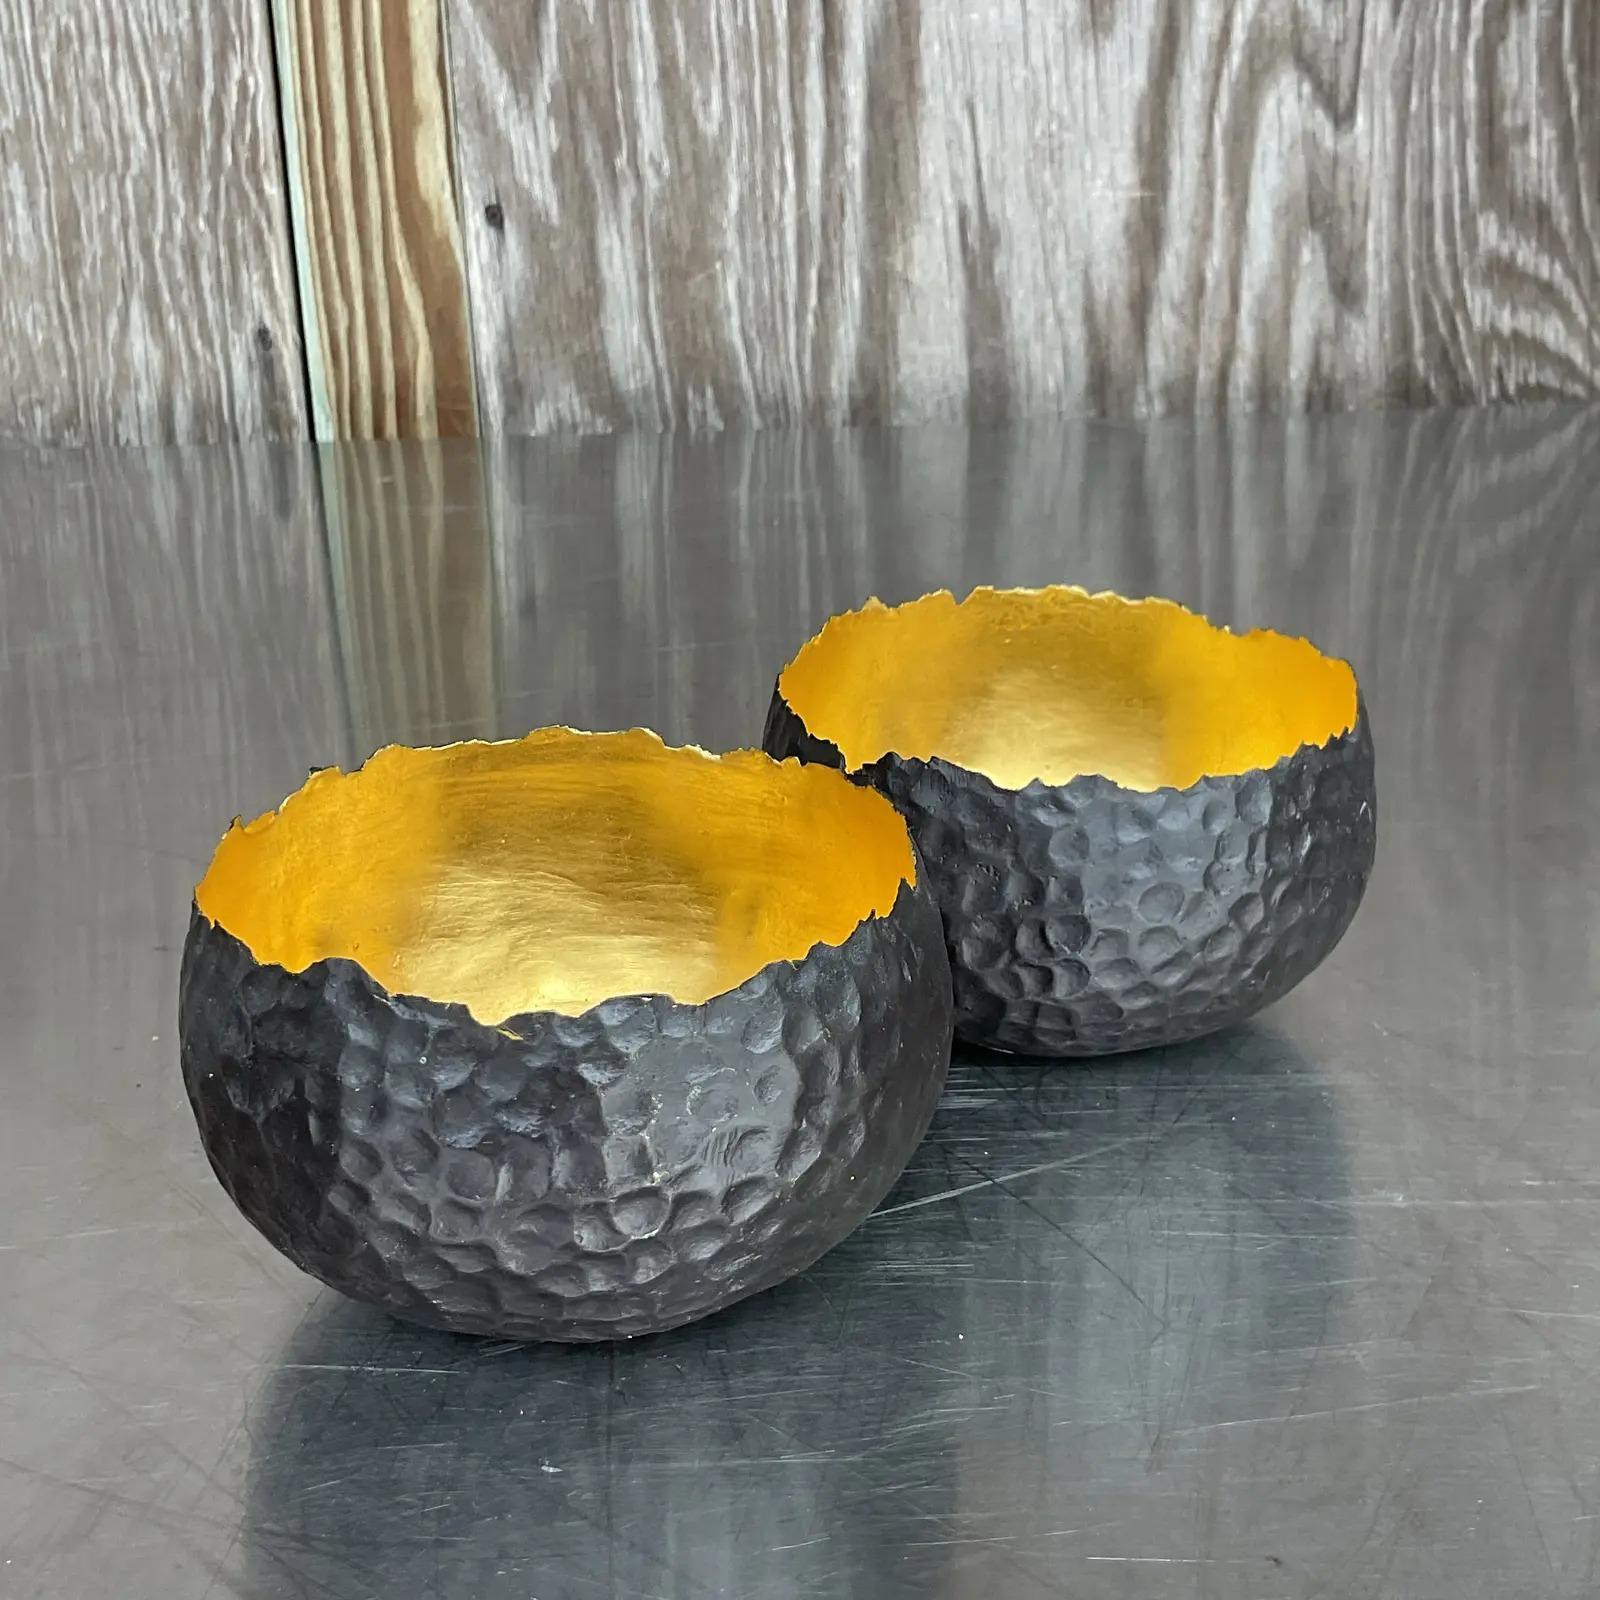 Vintage Contemporary Alexander Lamont Hammered Bronze Bowls - a Pair In Good Condition For Sale In west palm beach, FL